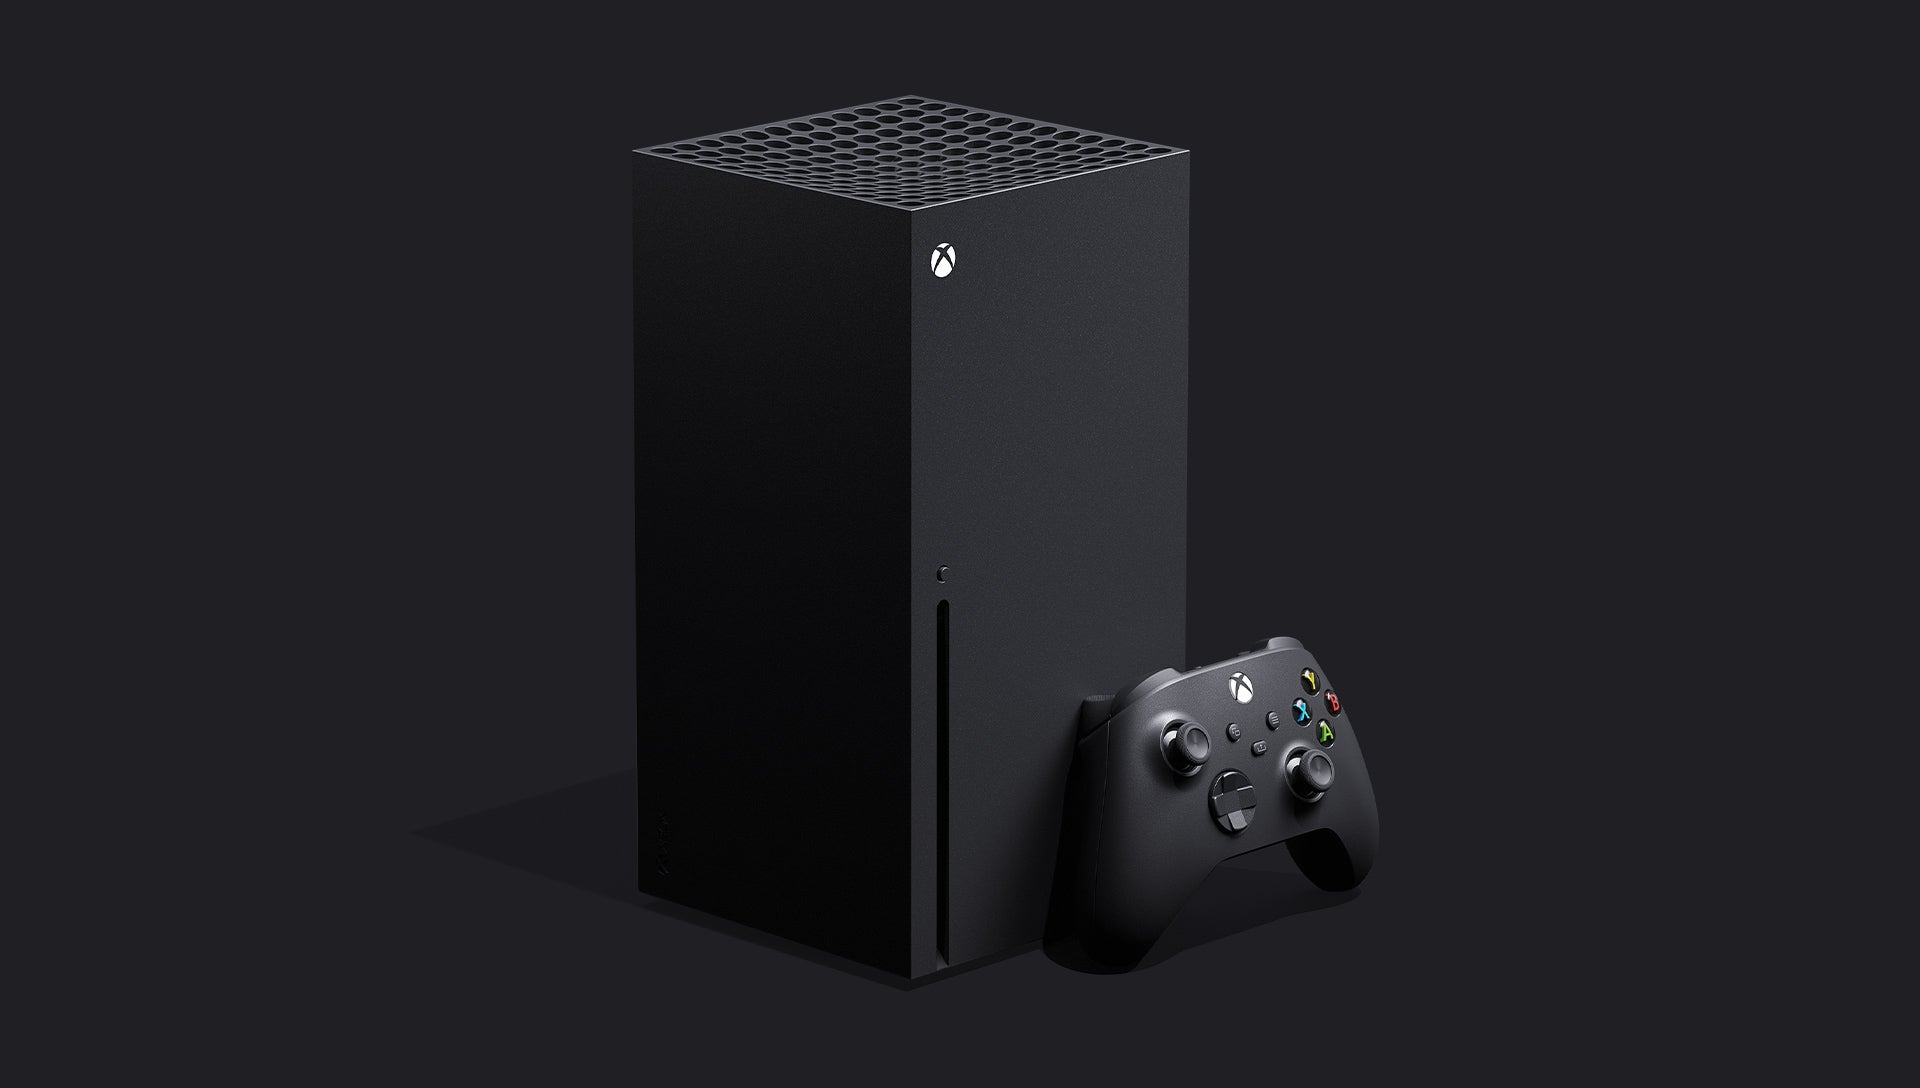 Xbox Series X specs and features confirmed so far, including 8K 